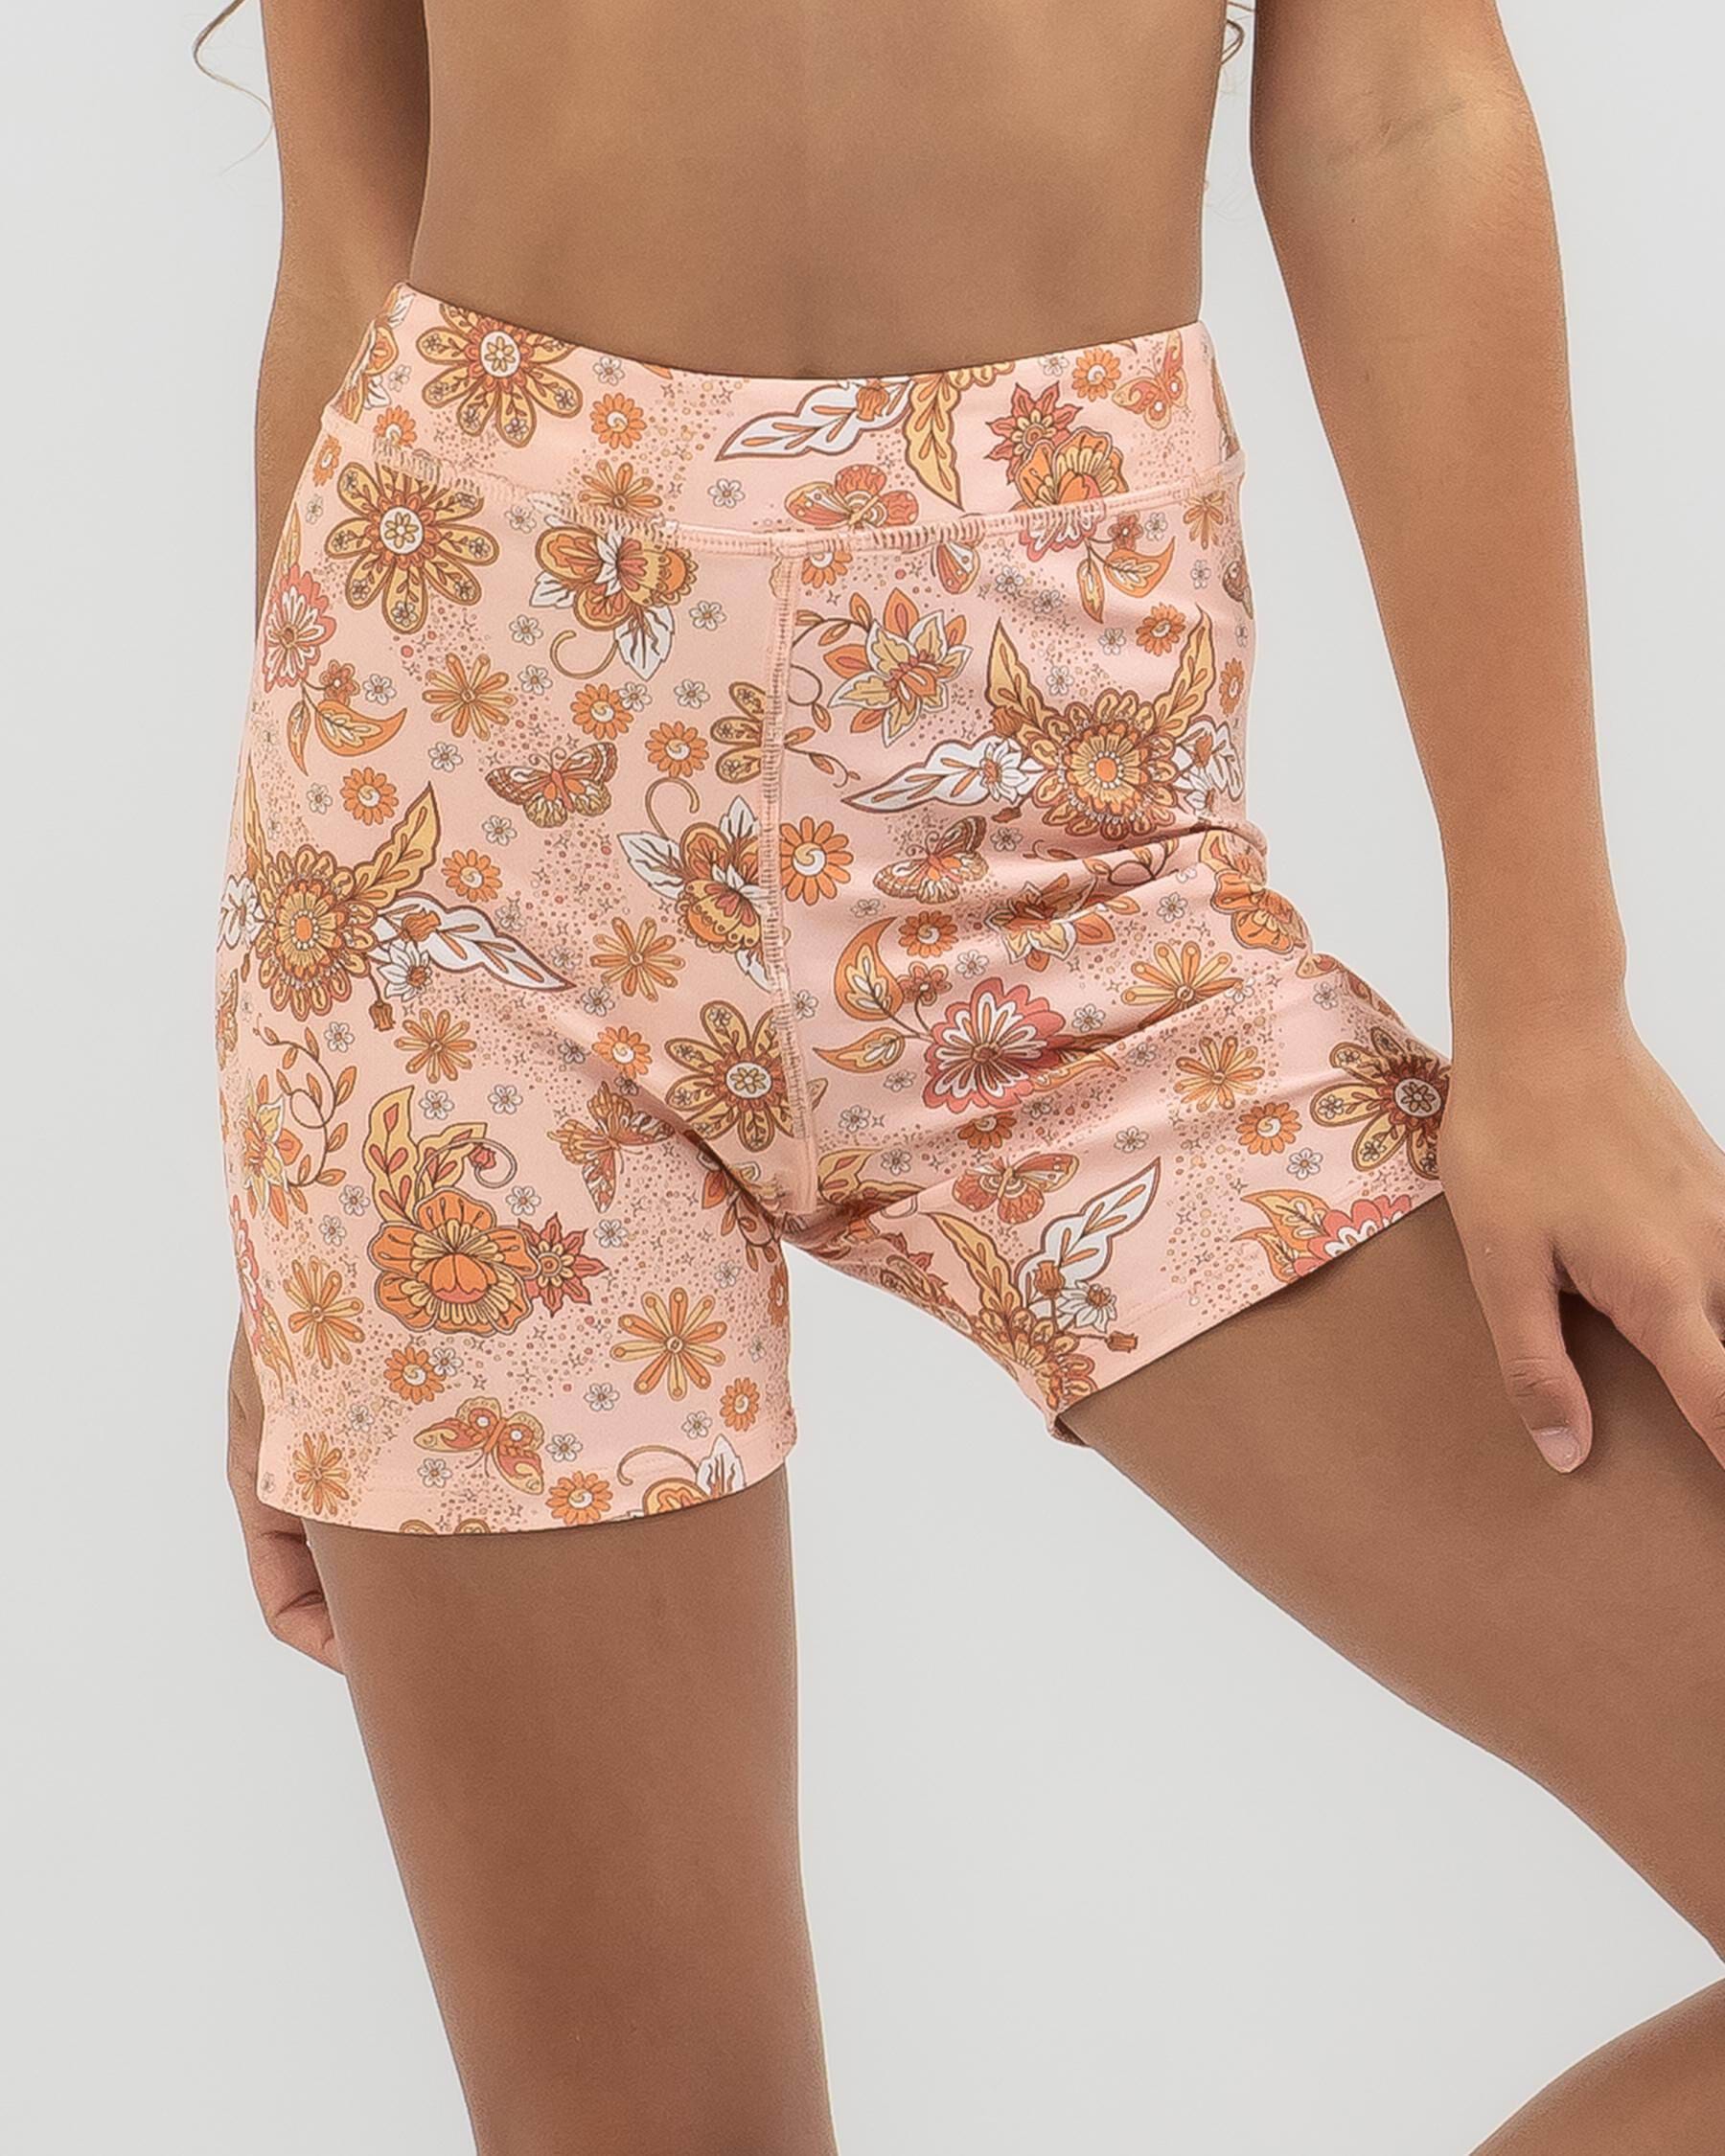 Shop Girls Bike Shorts Online - FREE* Shipping and Easy Returns